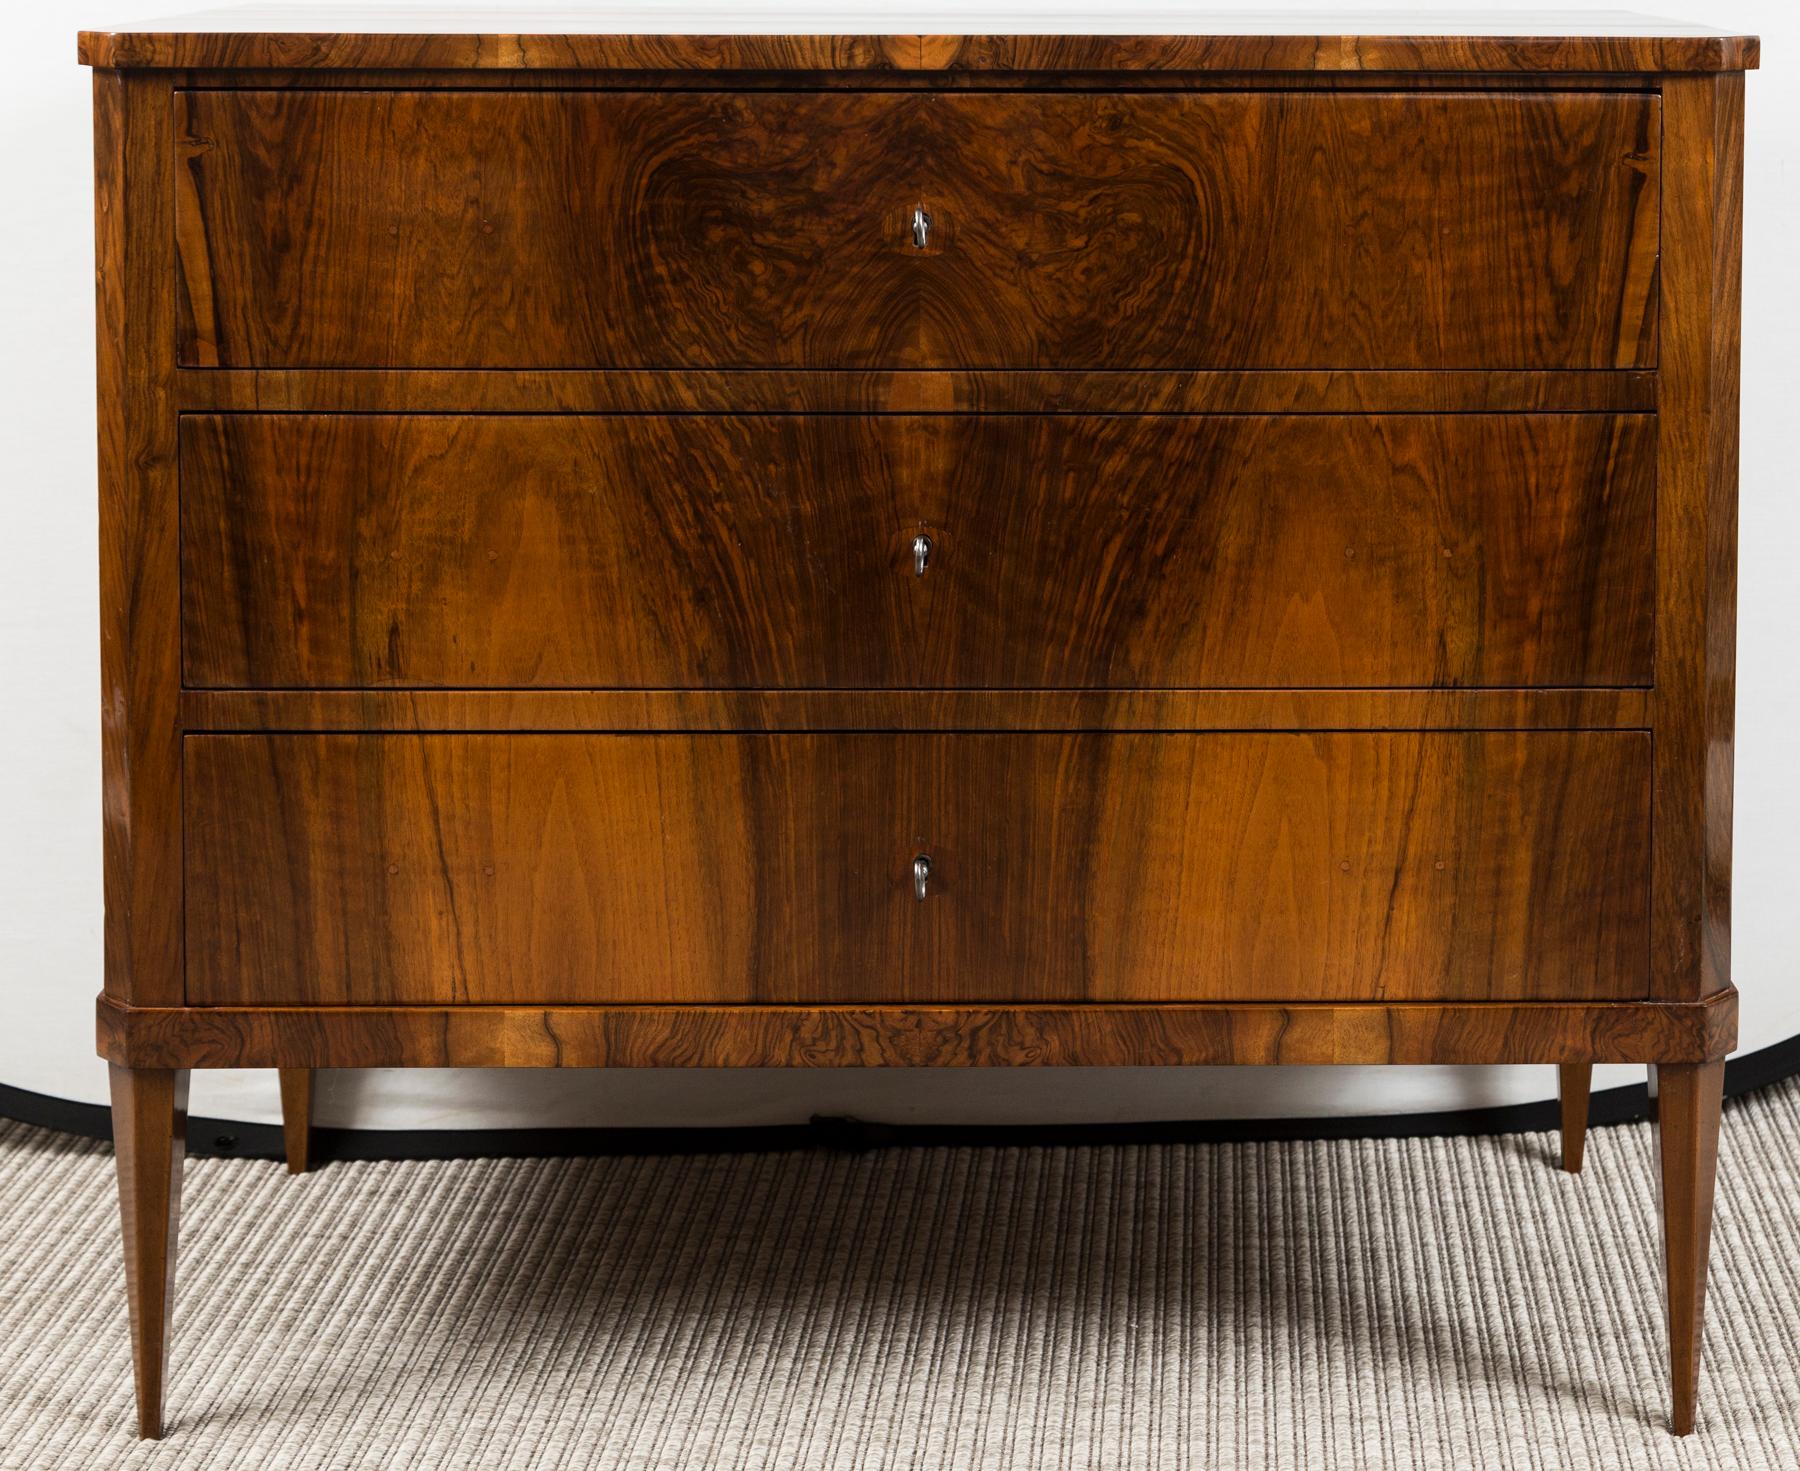 A stunning Biedermeier style walnut book matched veneer chest comprised of  three working drawers opening each with a key used as a pull and finishing on chamfered straight and tapered legs.

Origin: Germany

Condition: Excellent, entirely